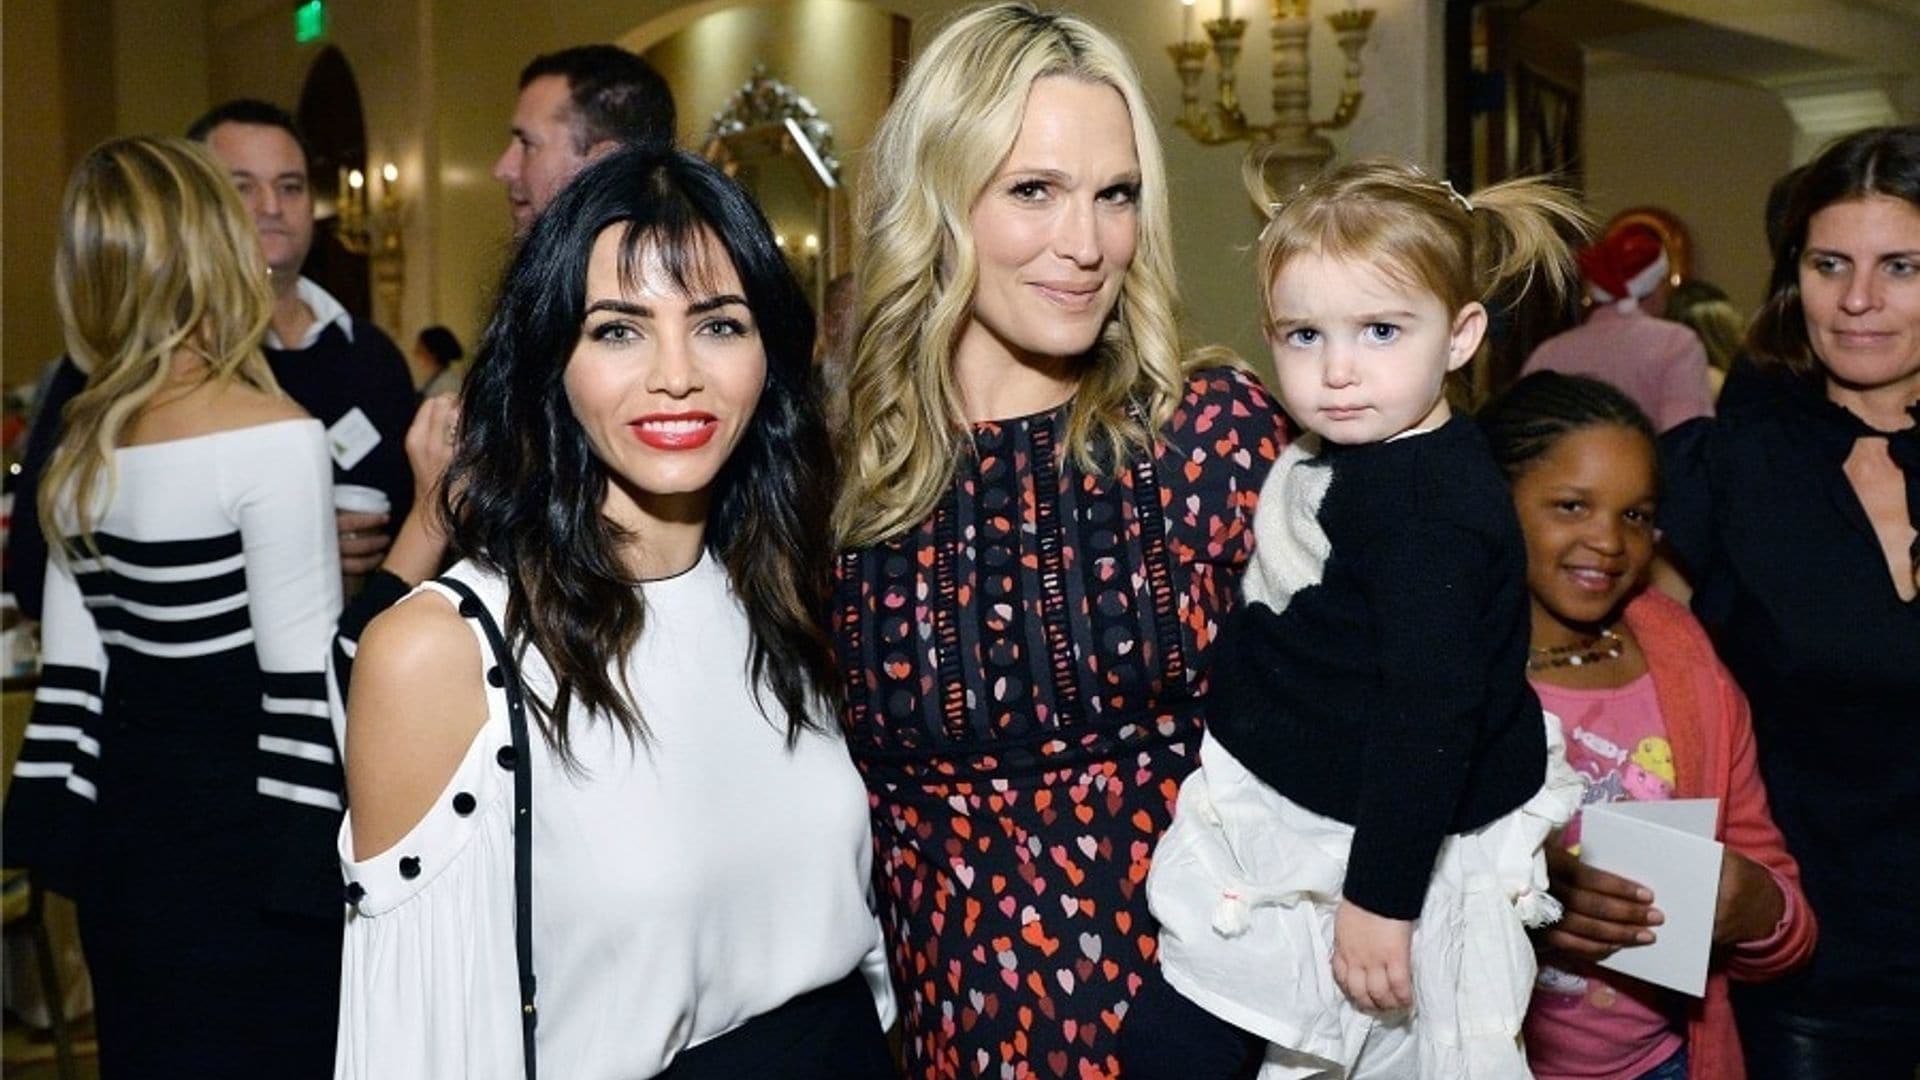 Celebrity week in photos: Jenna Dewan Tatum, Molly Sims and Jessica Alba are moms on a holiday mission and more